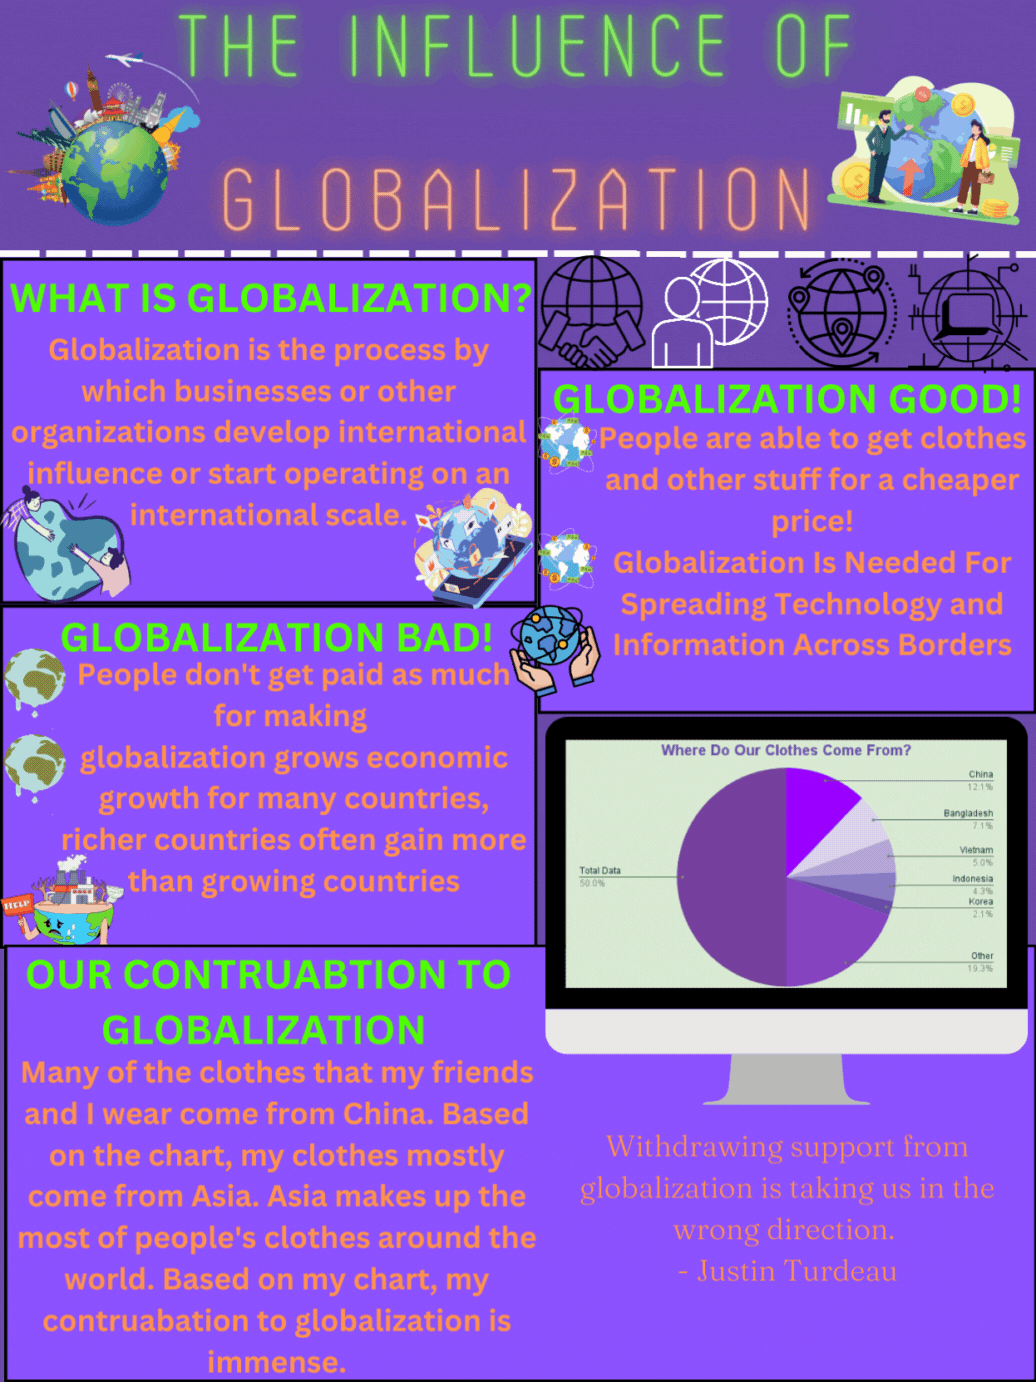 Globalization Infographic - Britany L